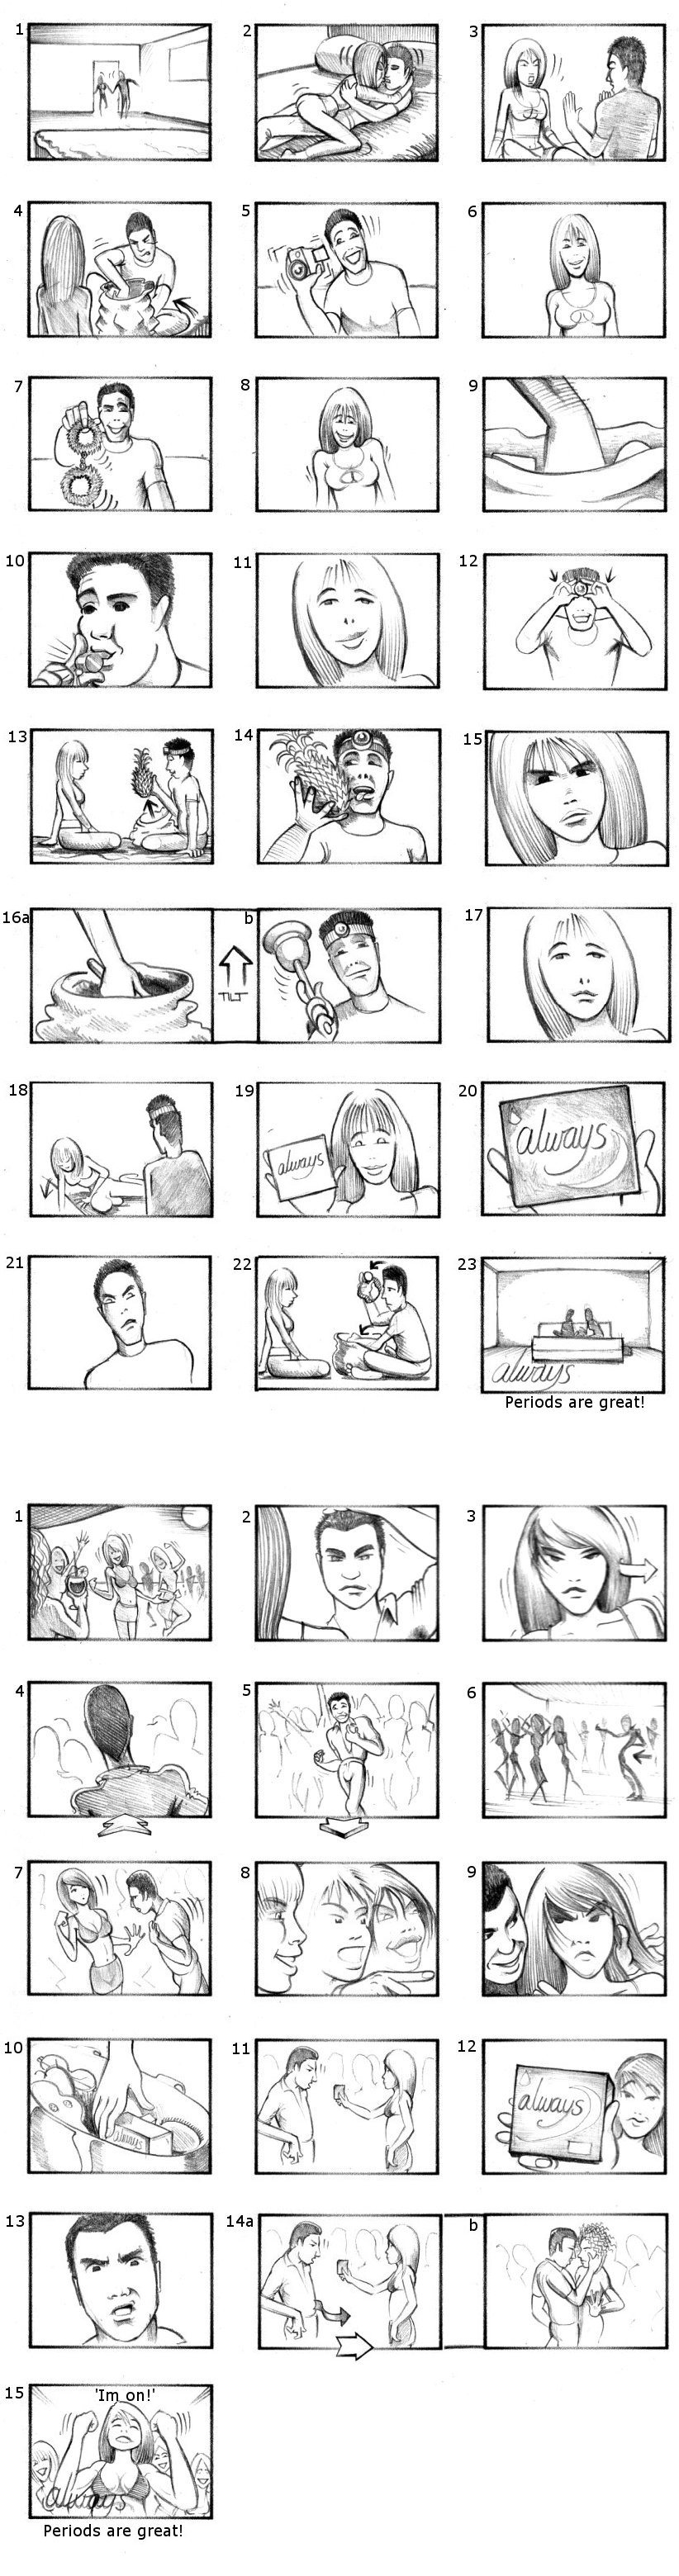 ALWAYS STORYBOARDS BY ANDY SPARROW